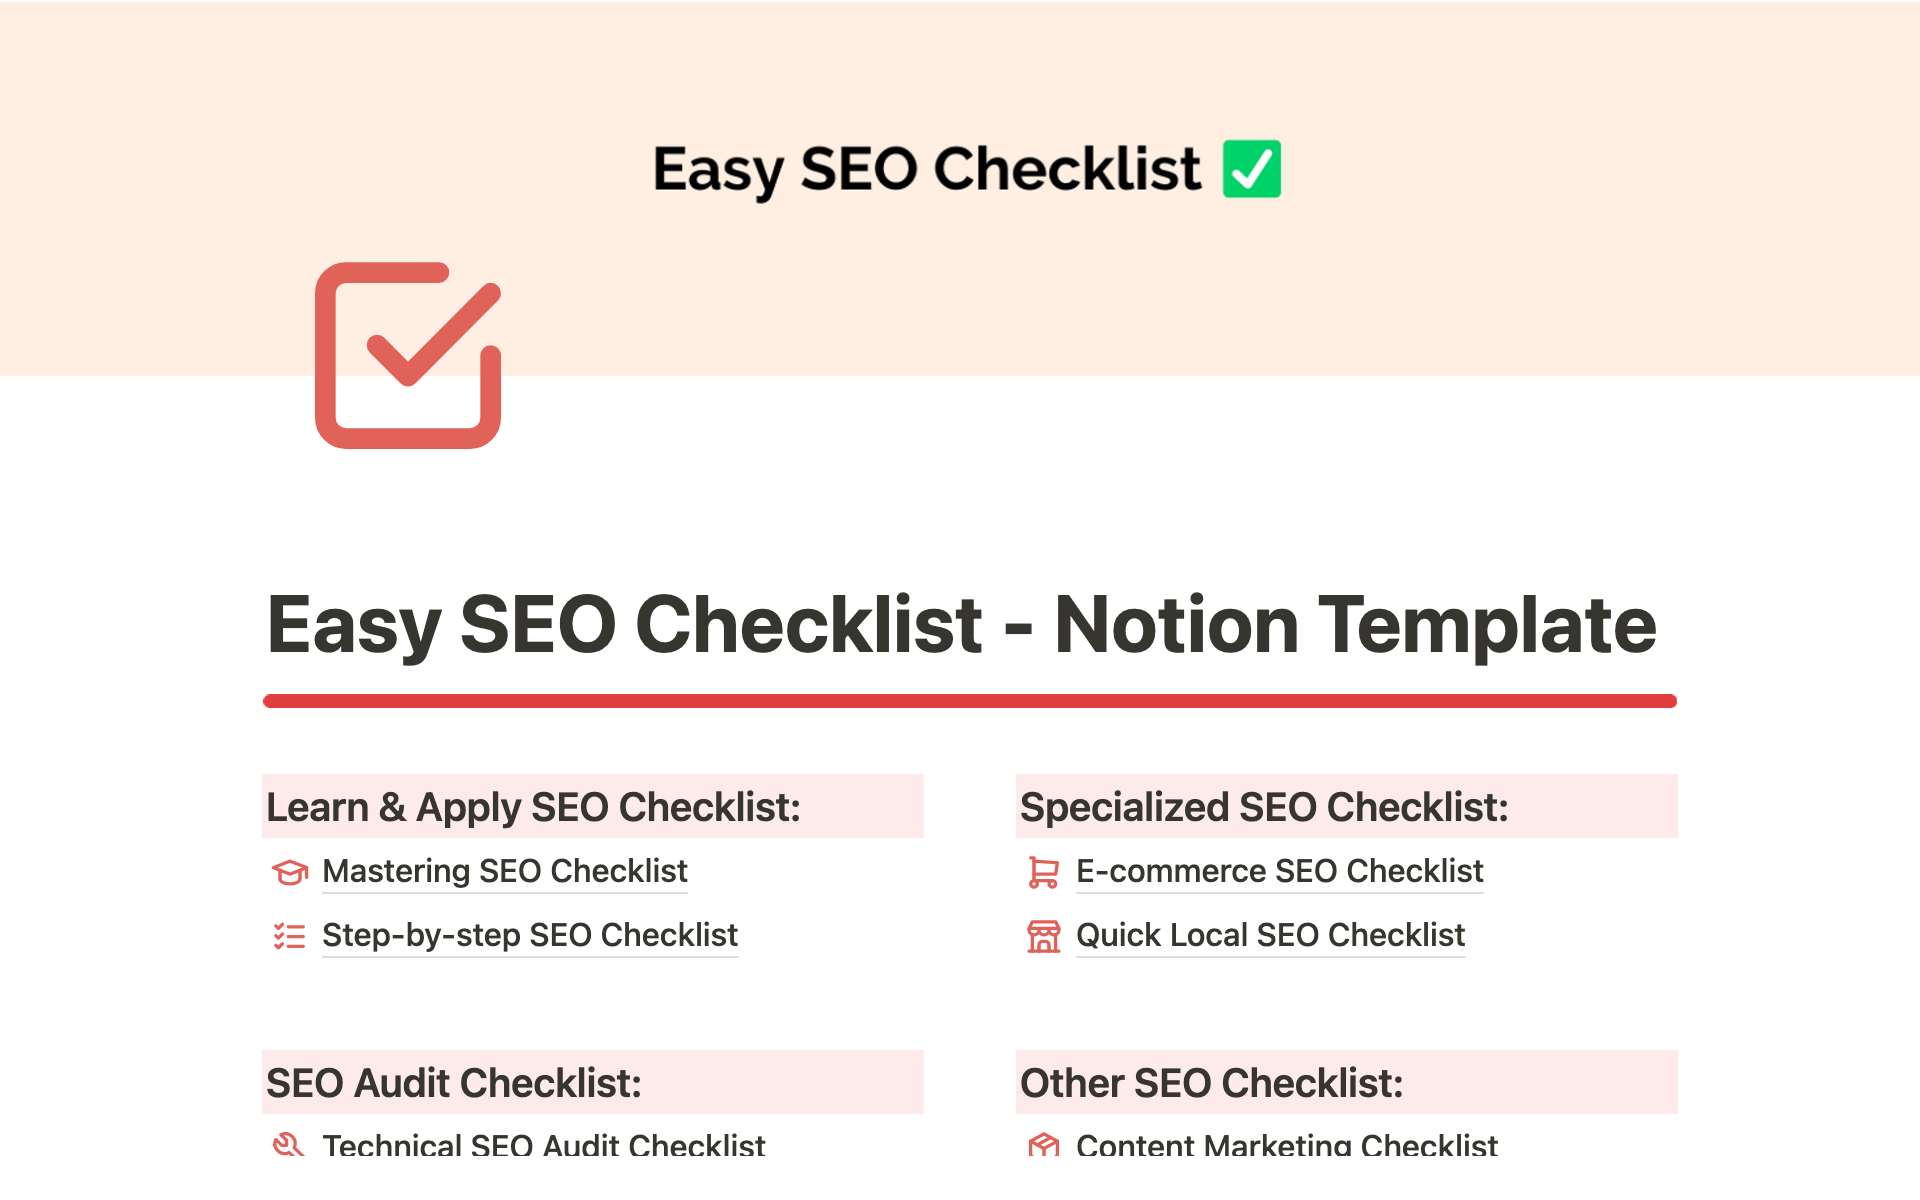 Easy SEO Checklist offers six SEO checklists that have been proven to assist you in learning and mastering SEO.